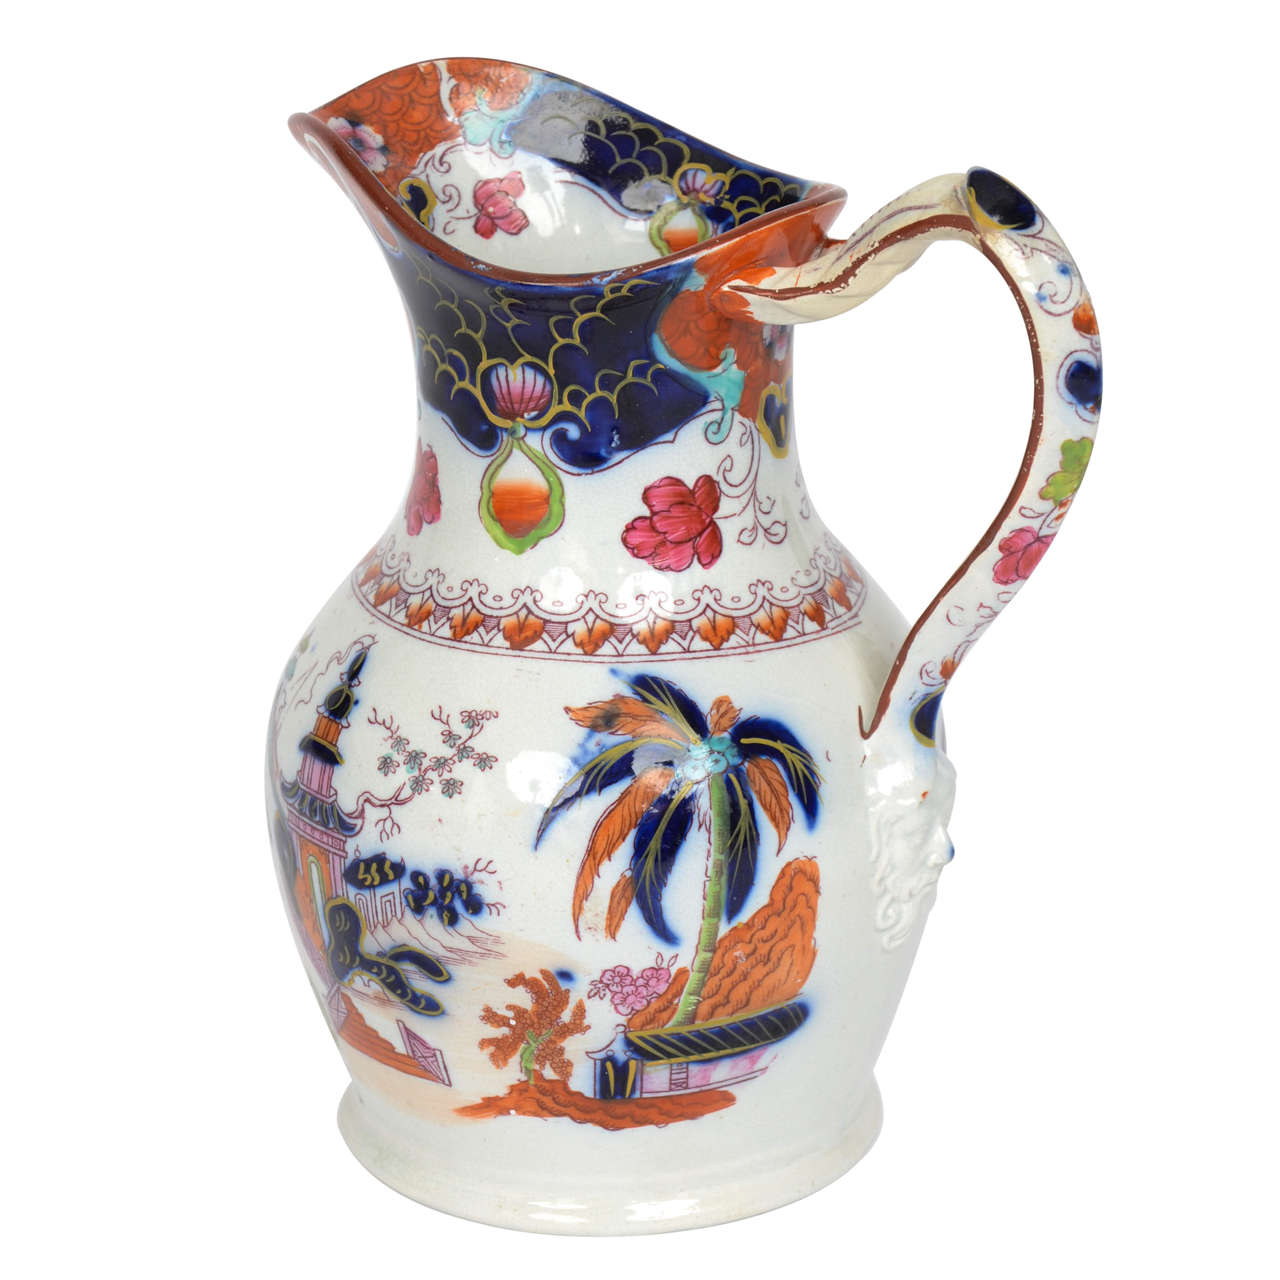 Early 19thC. Staffordshire, Pottery JUG or PITCHER, Mask Head Handle, ca.1830